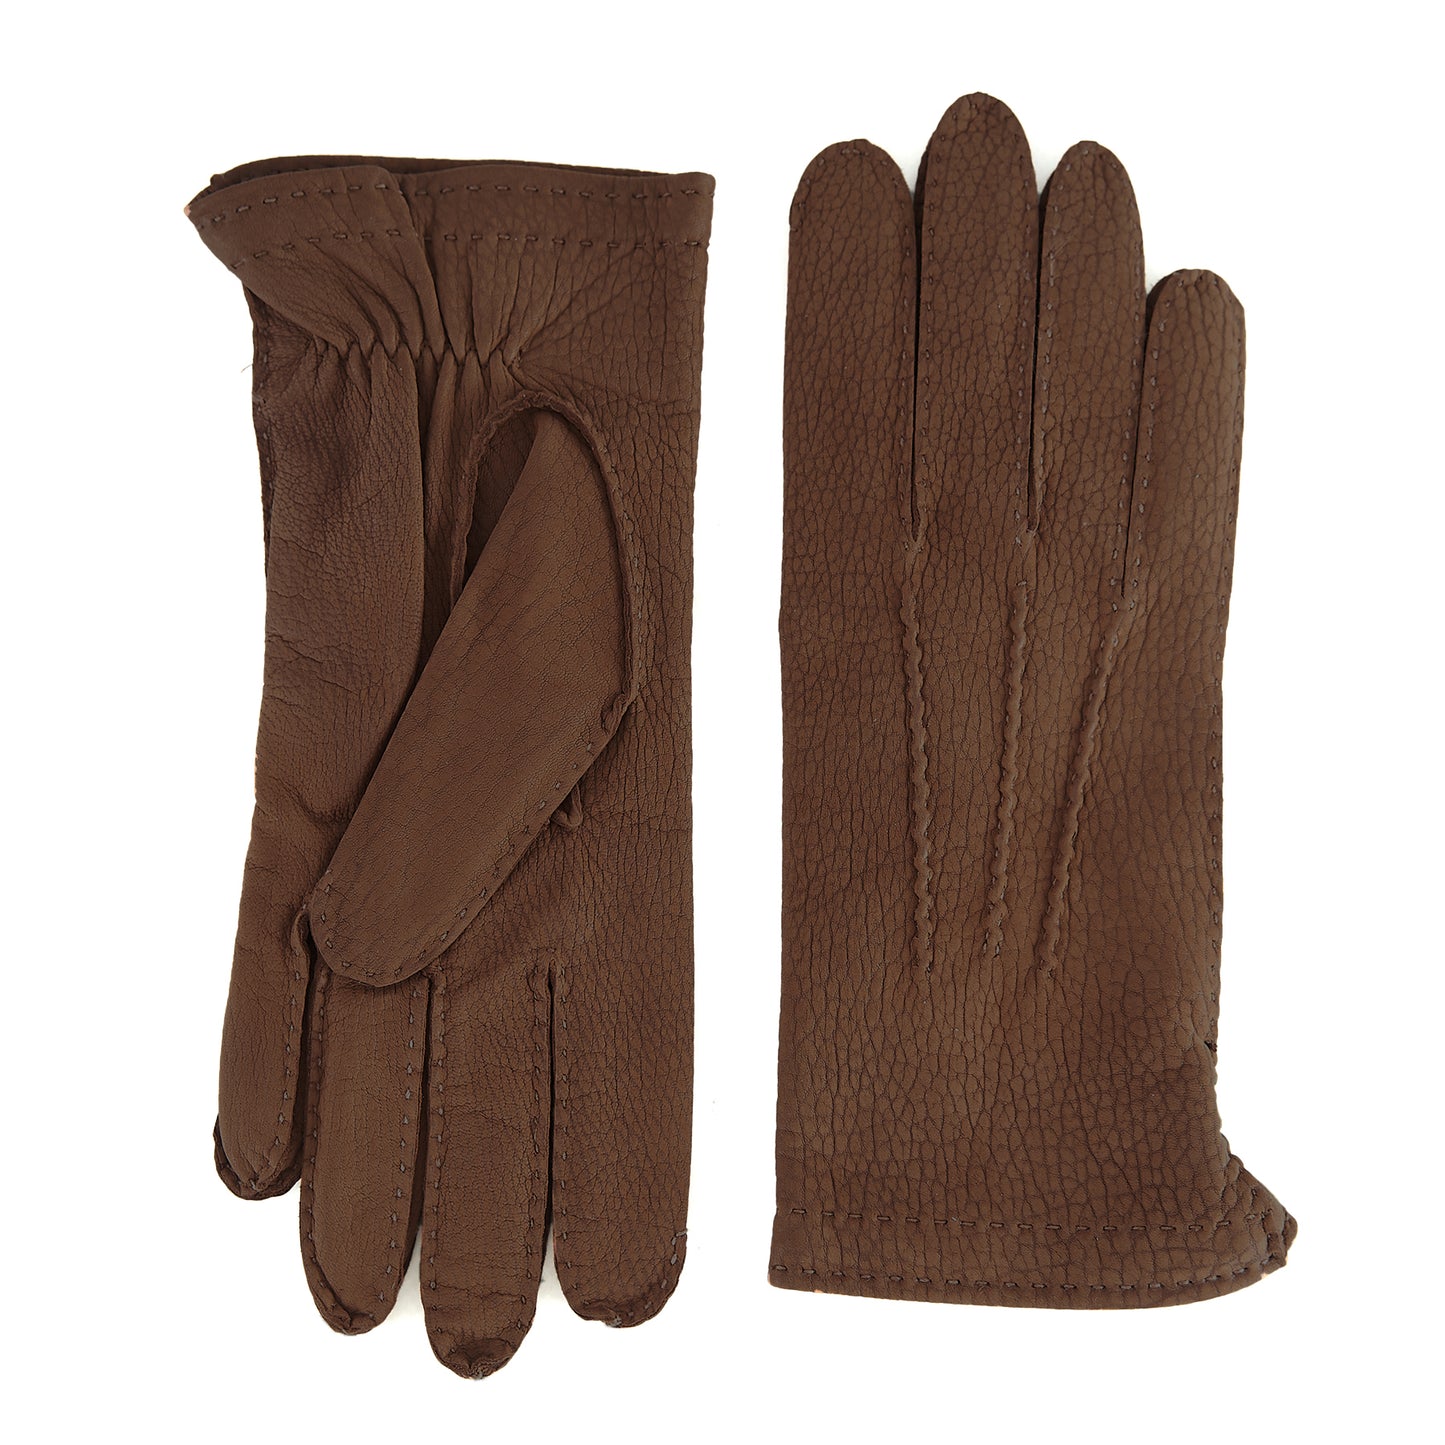 Men's biscotto lamb nubuck leather gloves and cashmere lining